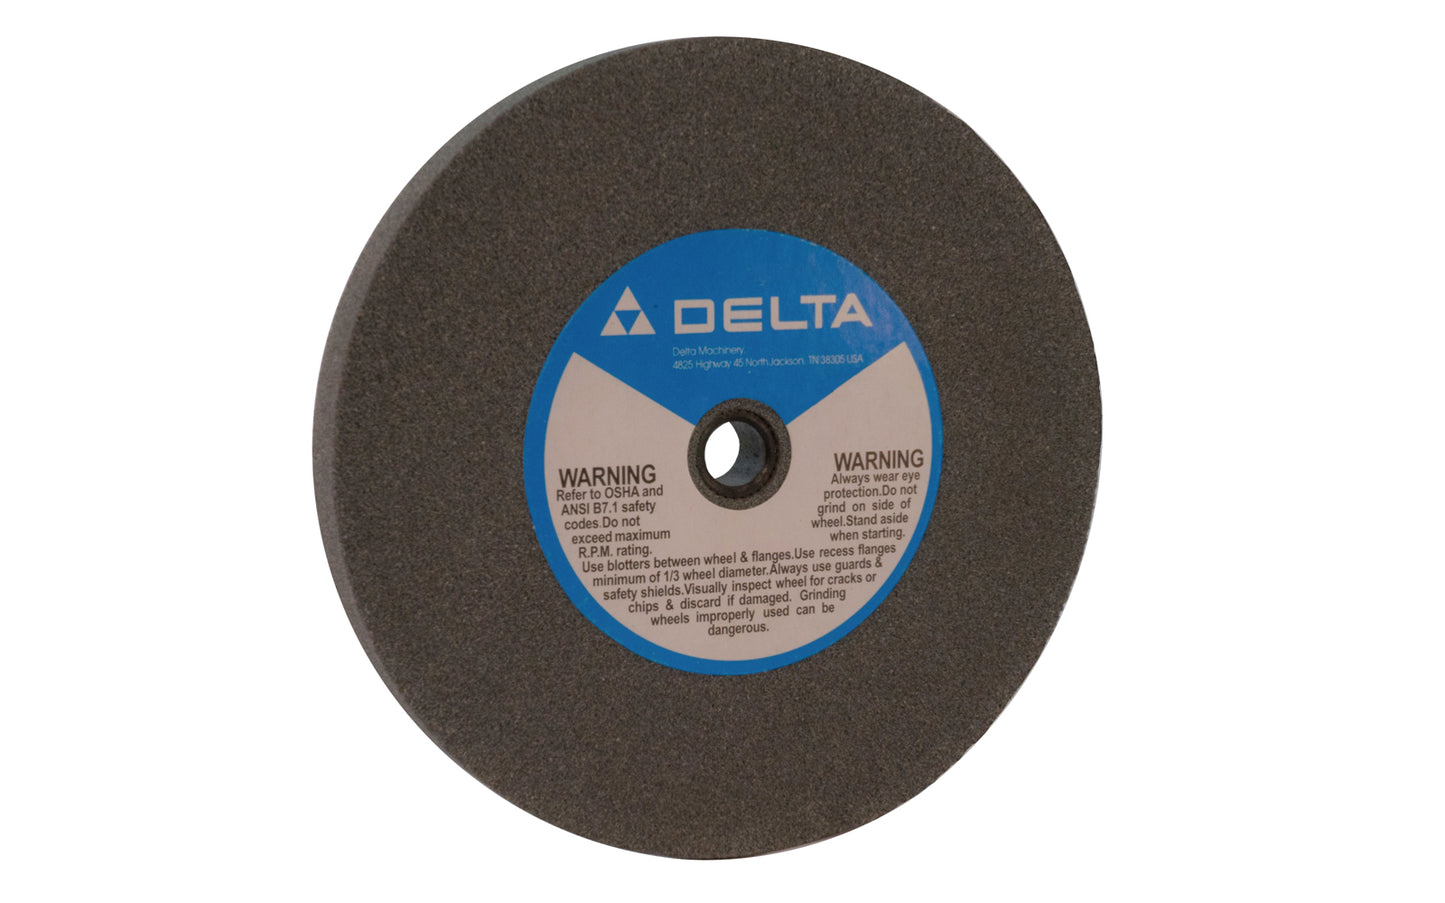 8" Aluminum Oxide Bench Grinding Wheel made by Delta. Designed for general purpose grinding on steel, high speed steels, & ferrous metals. Used for sharpening edges on tools.  8" diameter of wheel. 3/4" thickness. 36 grit.  